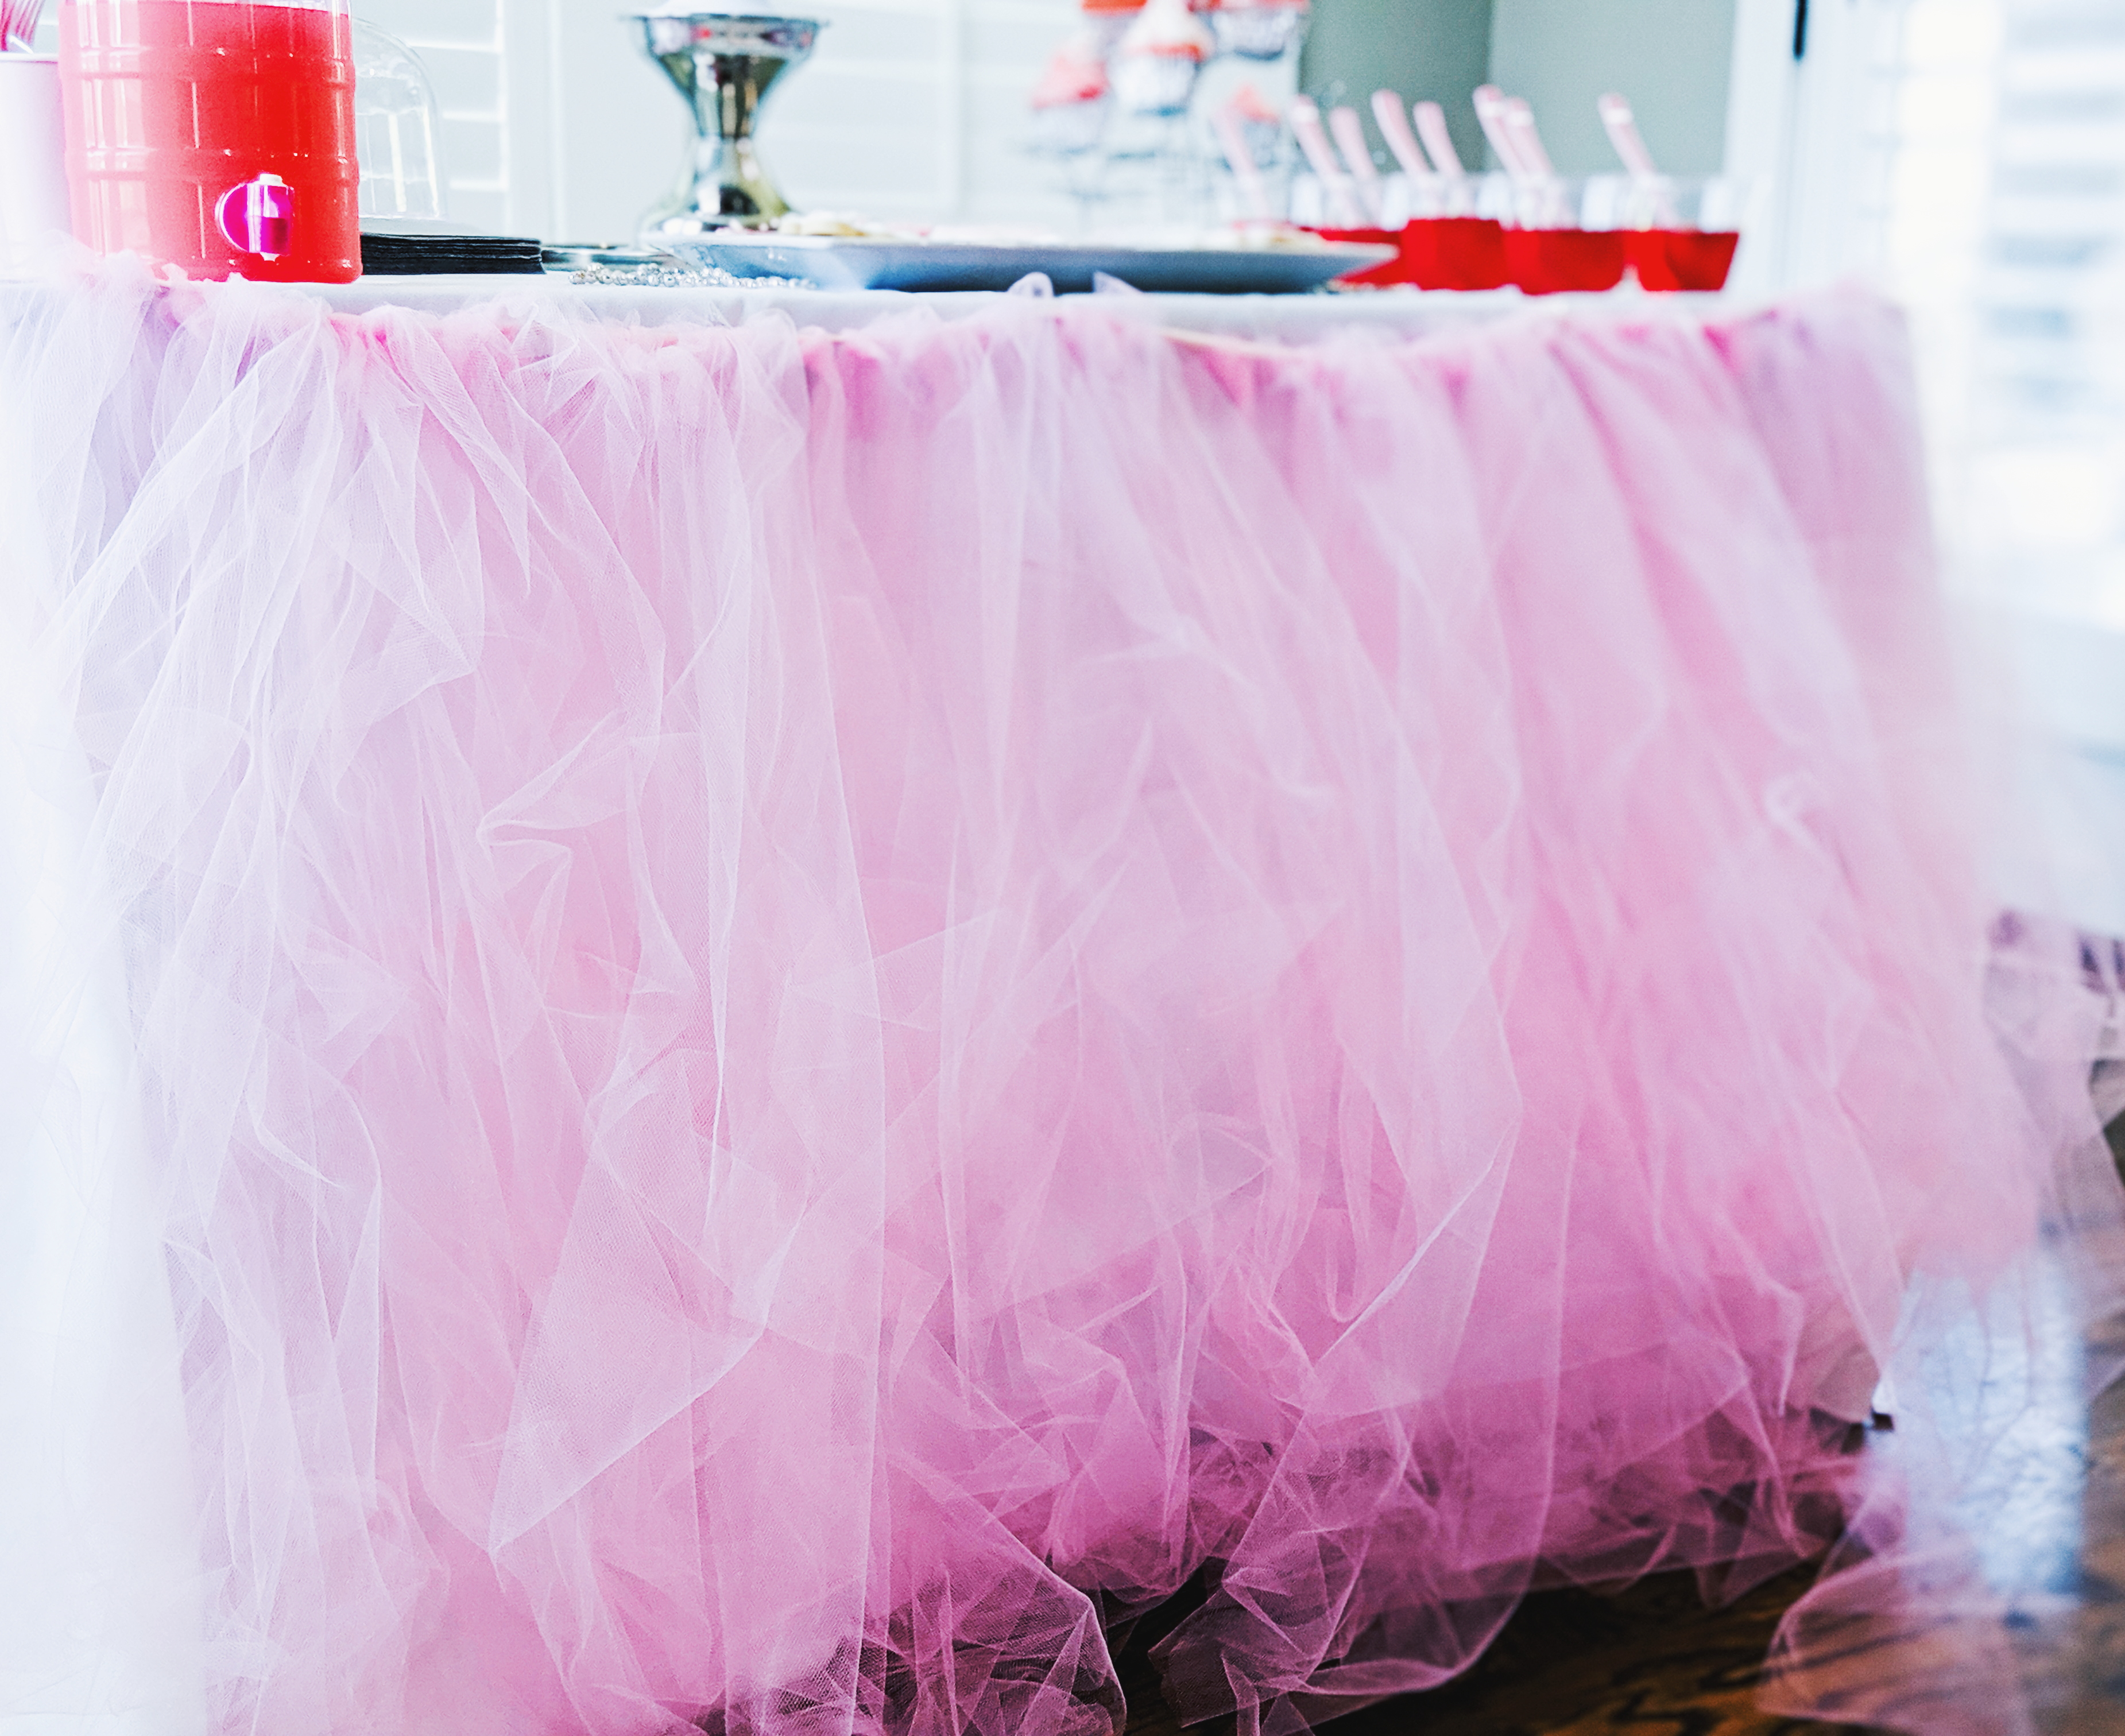 Tutu Cute Birthday Party - 2nd Birthday Party Ideas for Girls. This tutu cute party is perfect for your little dancer! Birthday party ideas for 2 year olds, pink birthday party, little girl birthday party. Two two cute. #tutucute #partyideas #2ndbirthday